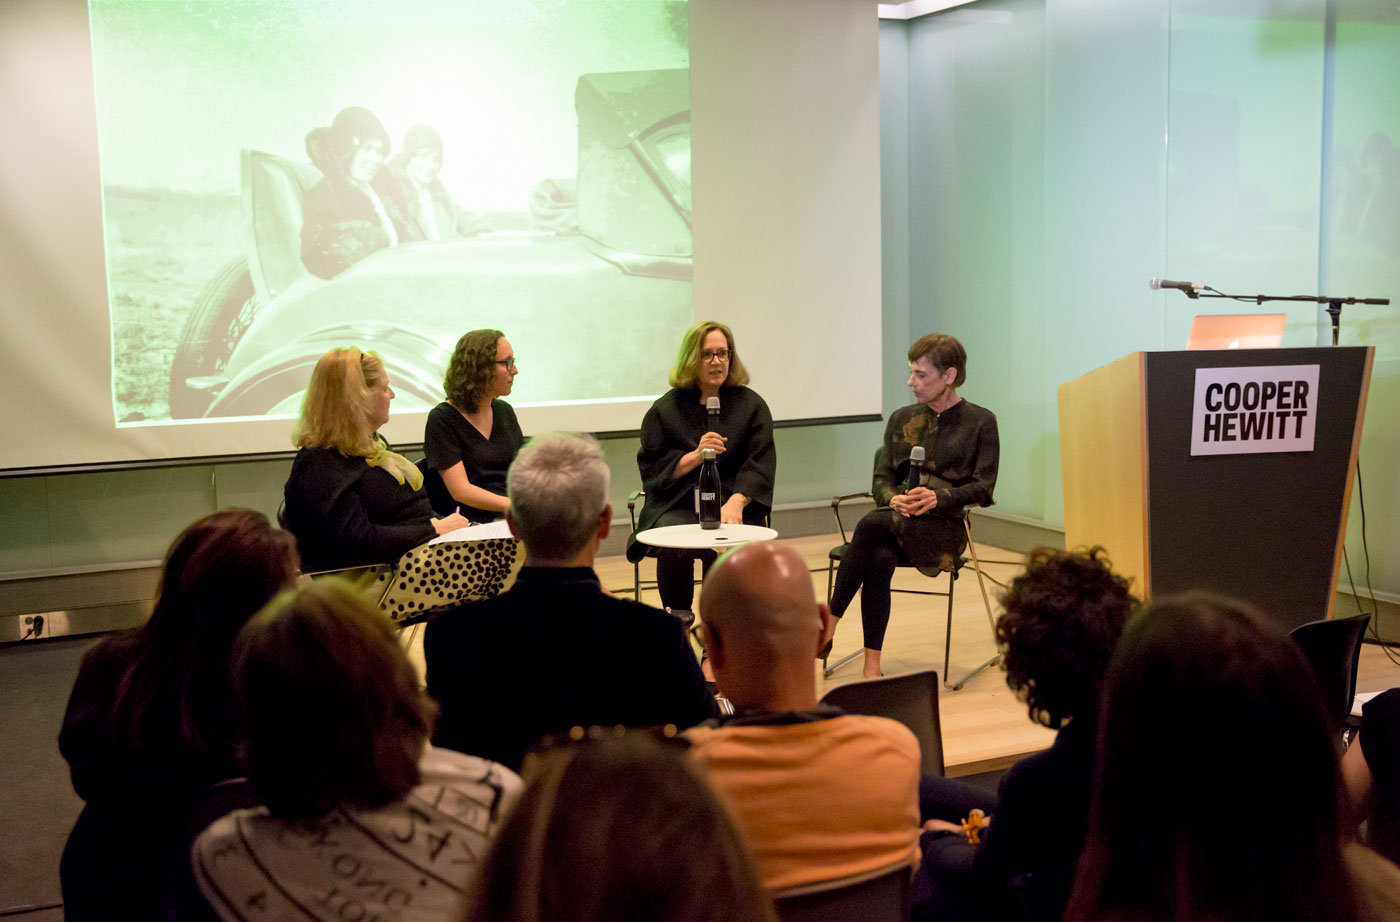 Image of panel discussion from Stepping Out Fashion in the 1920s